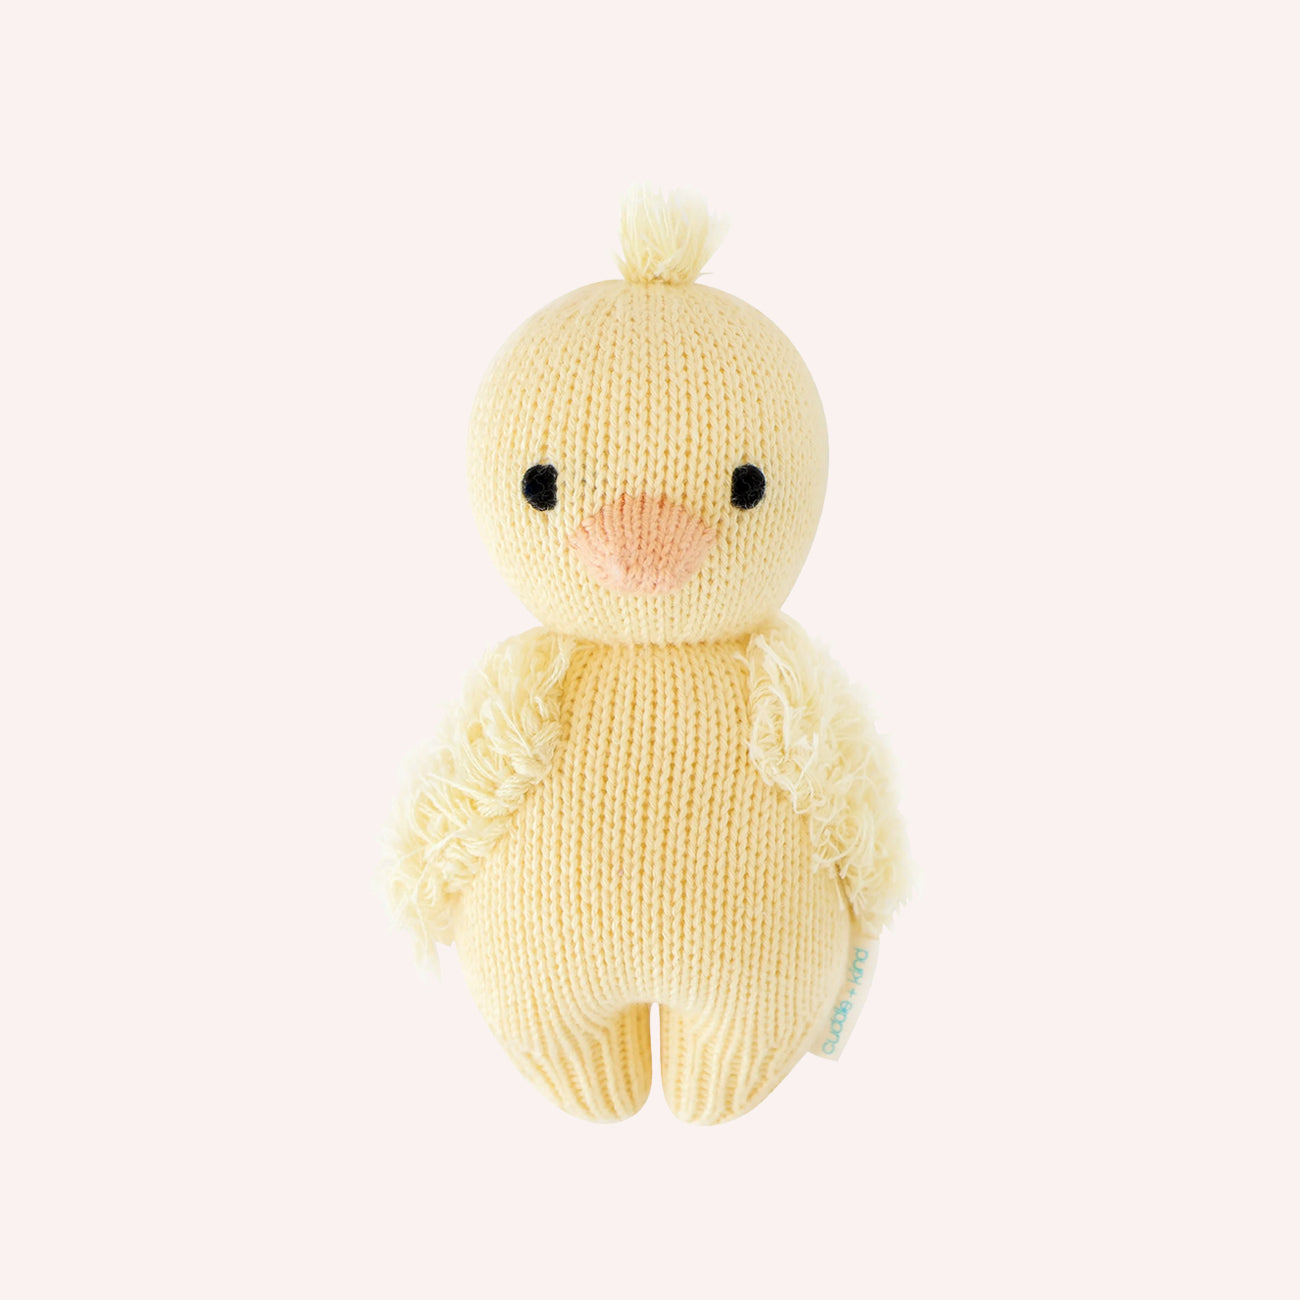 Hand Knitted Animal - Baby Duckling